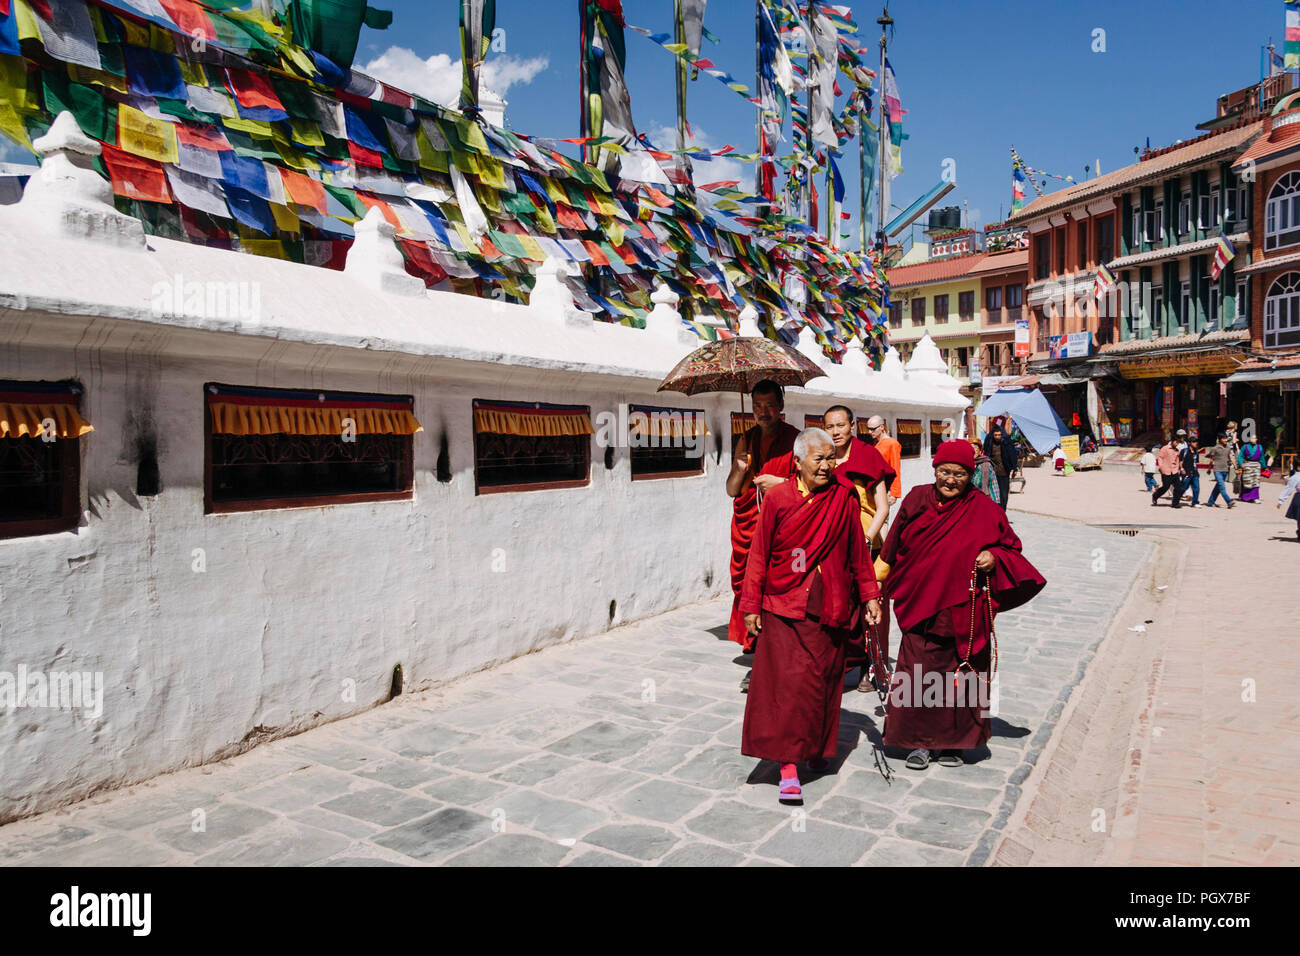 Bodhnath , Kathmandu, Bagmati, Nepal : Buddhist monks and nuns in maroon robes walk around the Great stupa of Bodhnath, the largest in Asia and one of Stock Photo